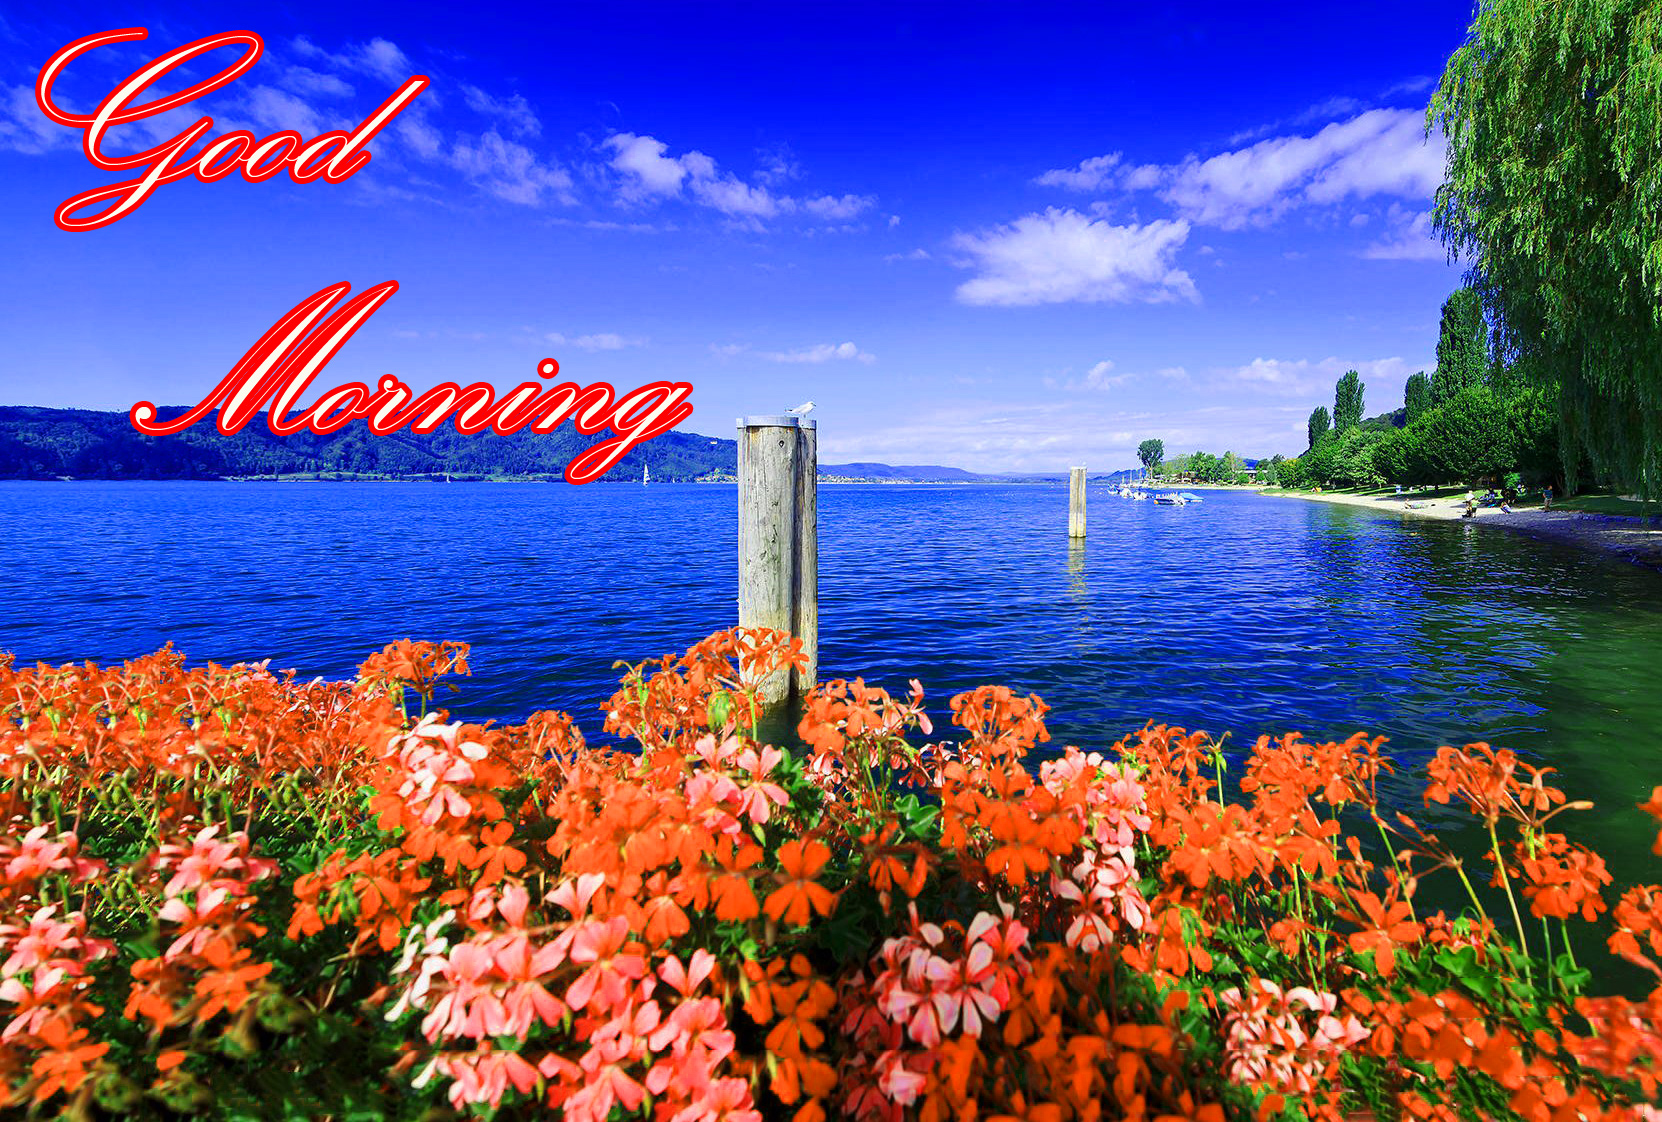 Latest Good Morning Image Wallpapers Photo Pics HD Download For